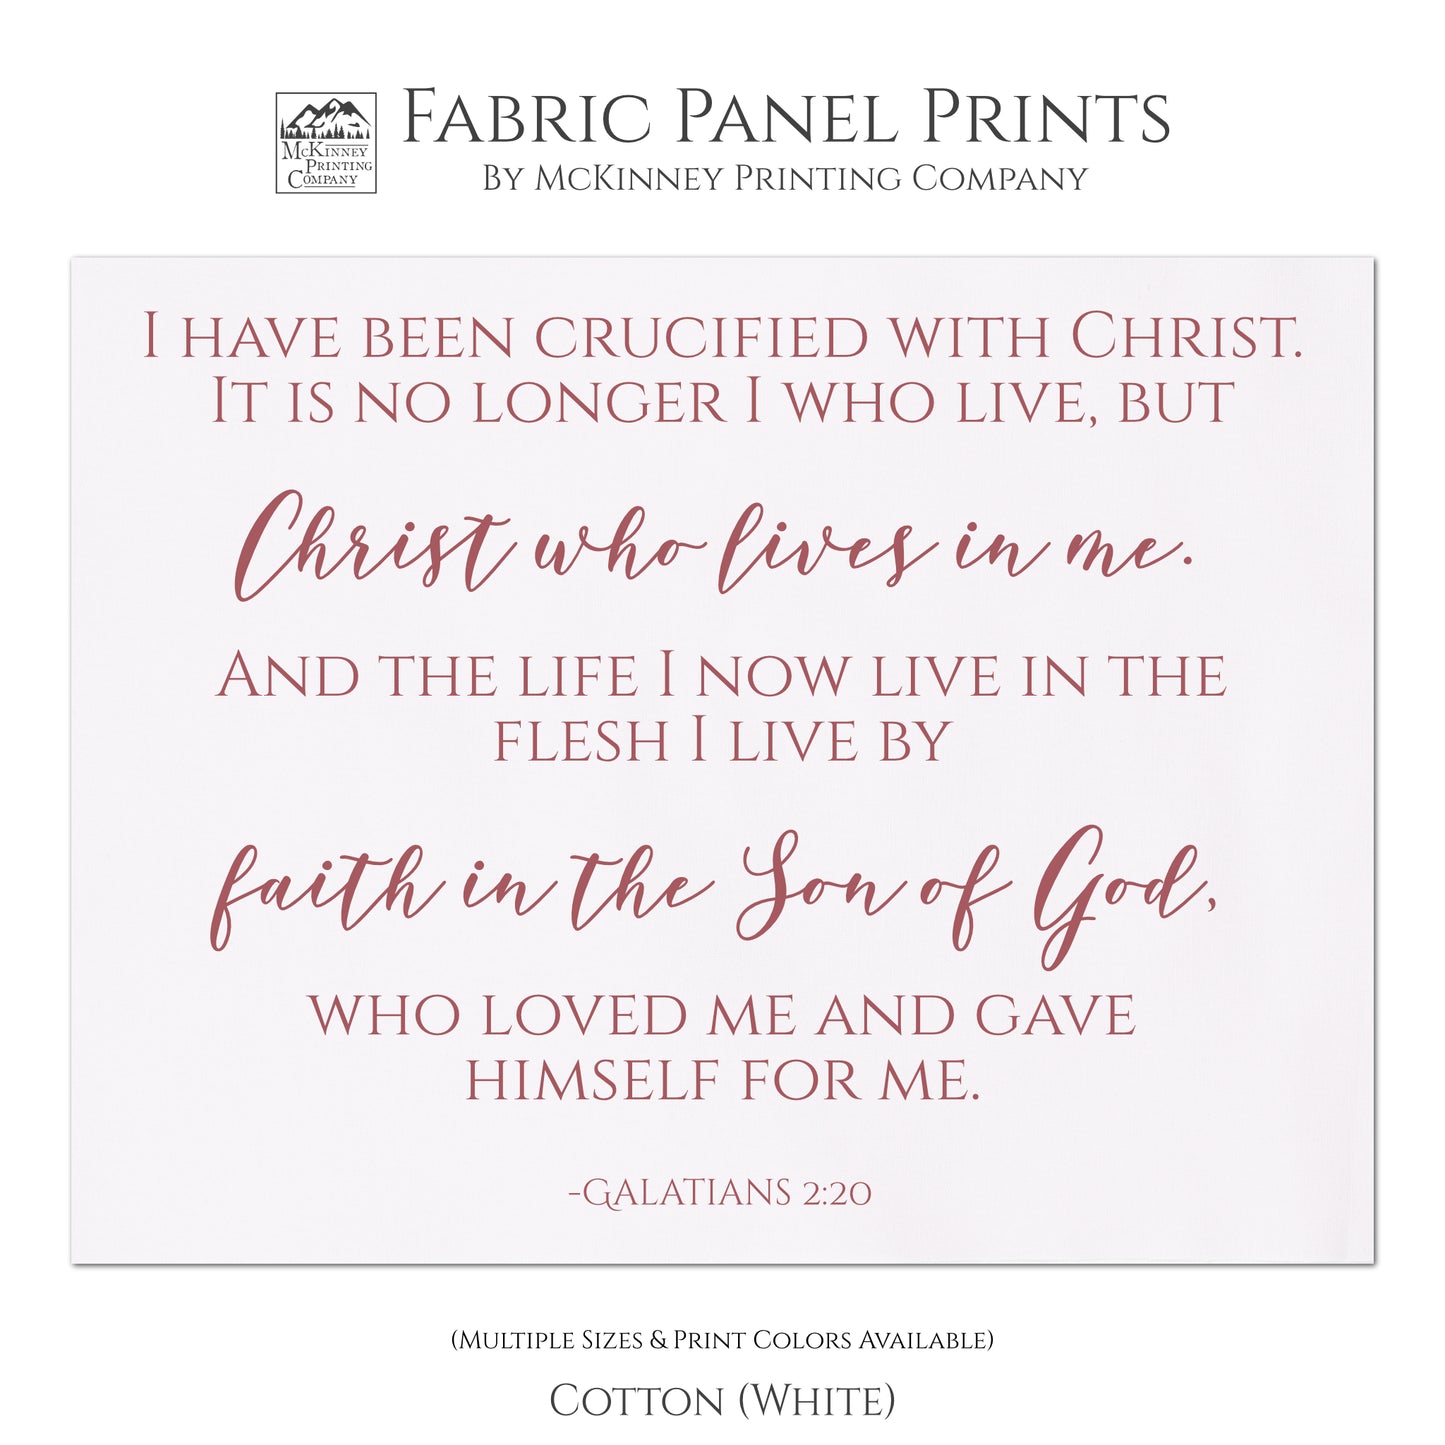 I have been crucified with Christ. It is no longer I who live, but, Christ who lives in me. And the life I now live in the flesh I live by faith in the Son of God, who loved me and gave himself for me. - Galatians 2:20, Religions Fabric, Scripture, Quilt Fabric Panel - Cotton, White